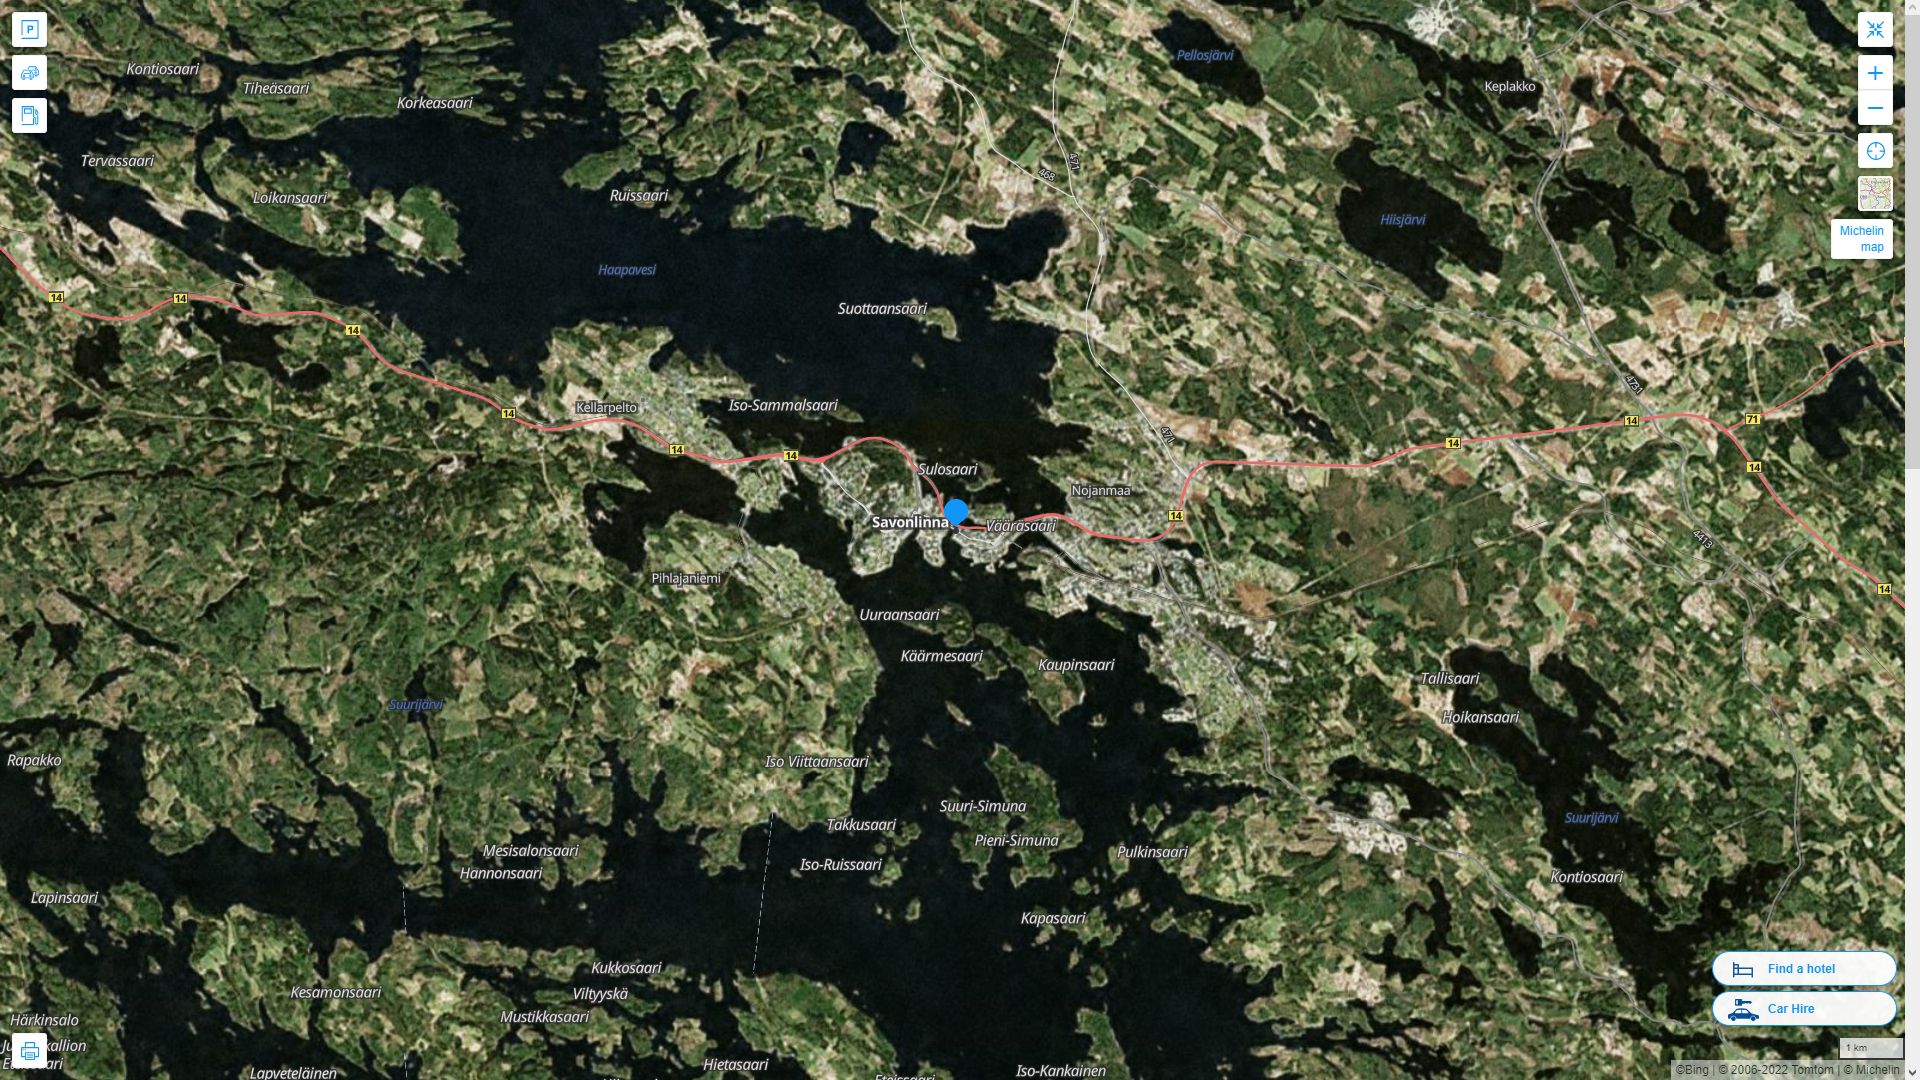 Savonlinna Highway and Road Map with Satellite View